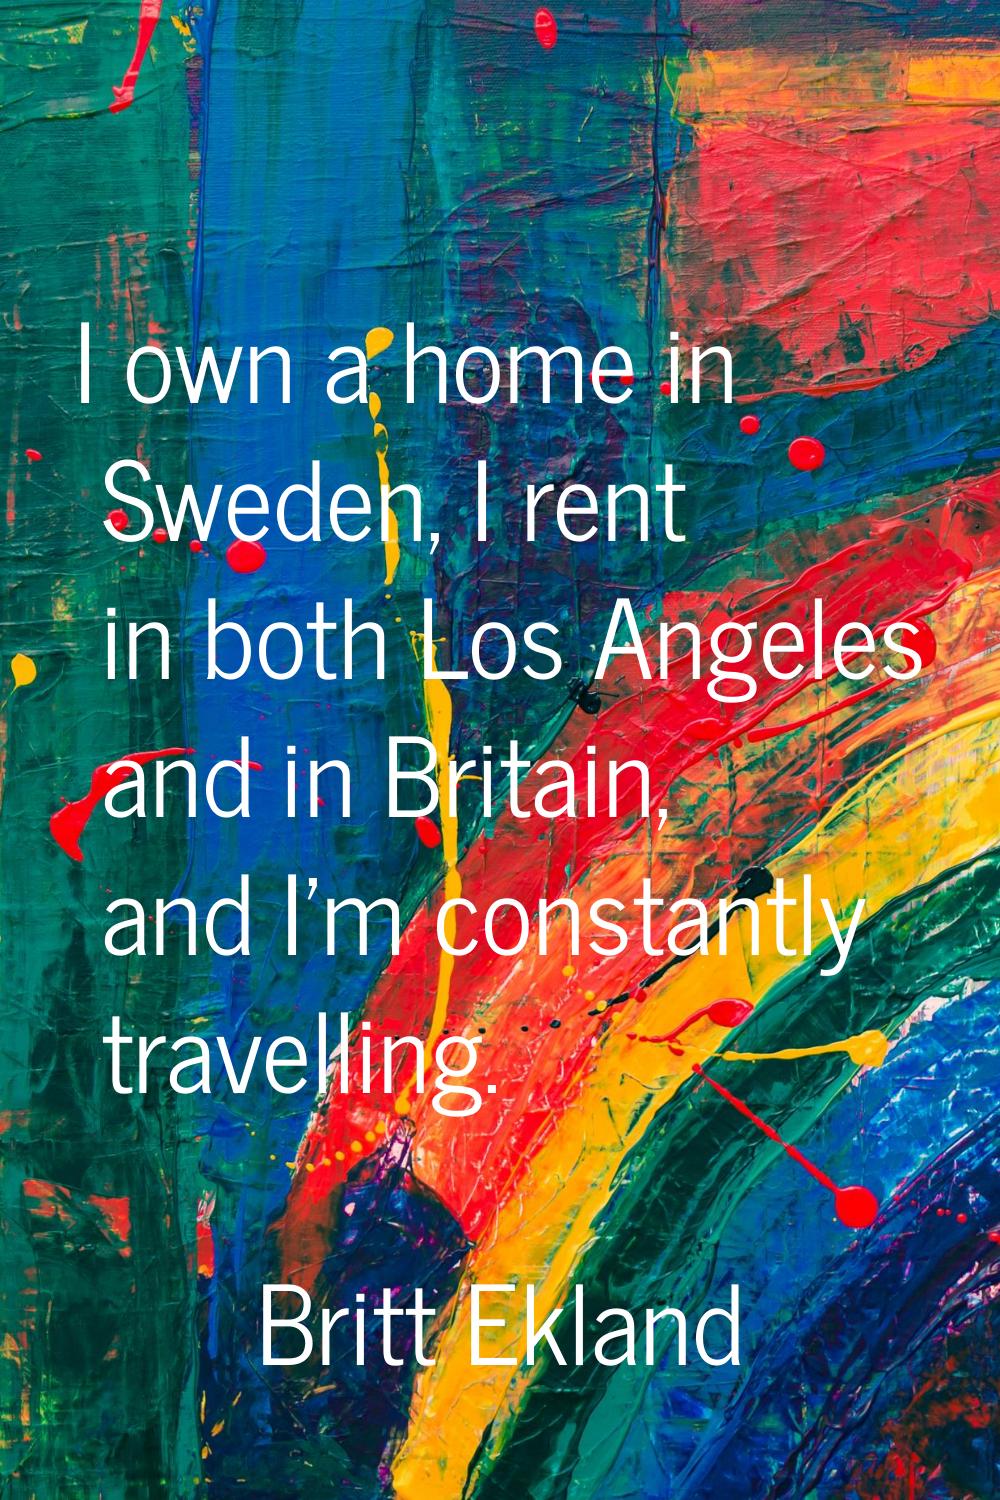 I own a home in Sweden, I rent in both Los Angeles and in Britain, and I'm constantly travelling.